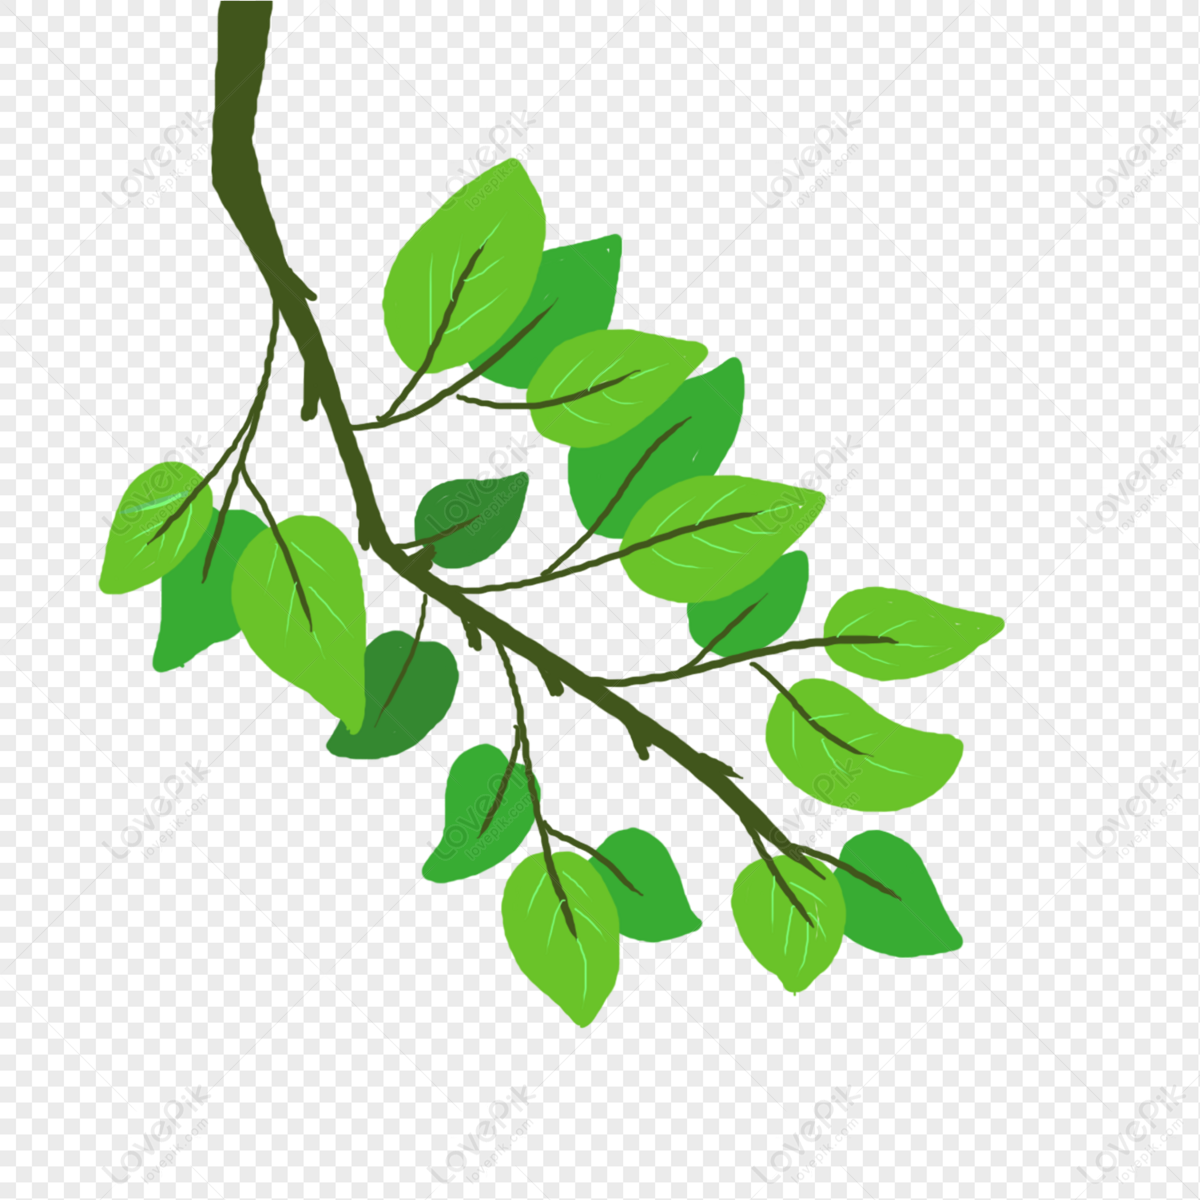 Green Cartoon Twig Leaves Free PNG And Clipart Image For Free Download -  Lovepik | 401456079